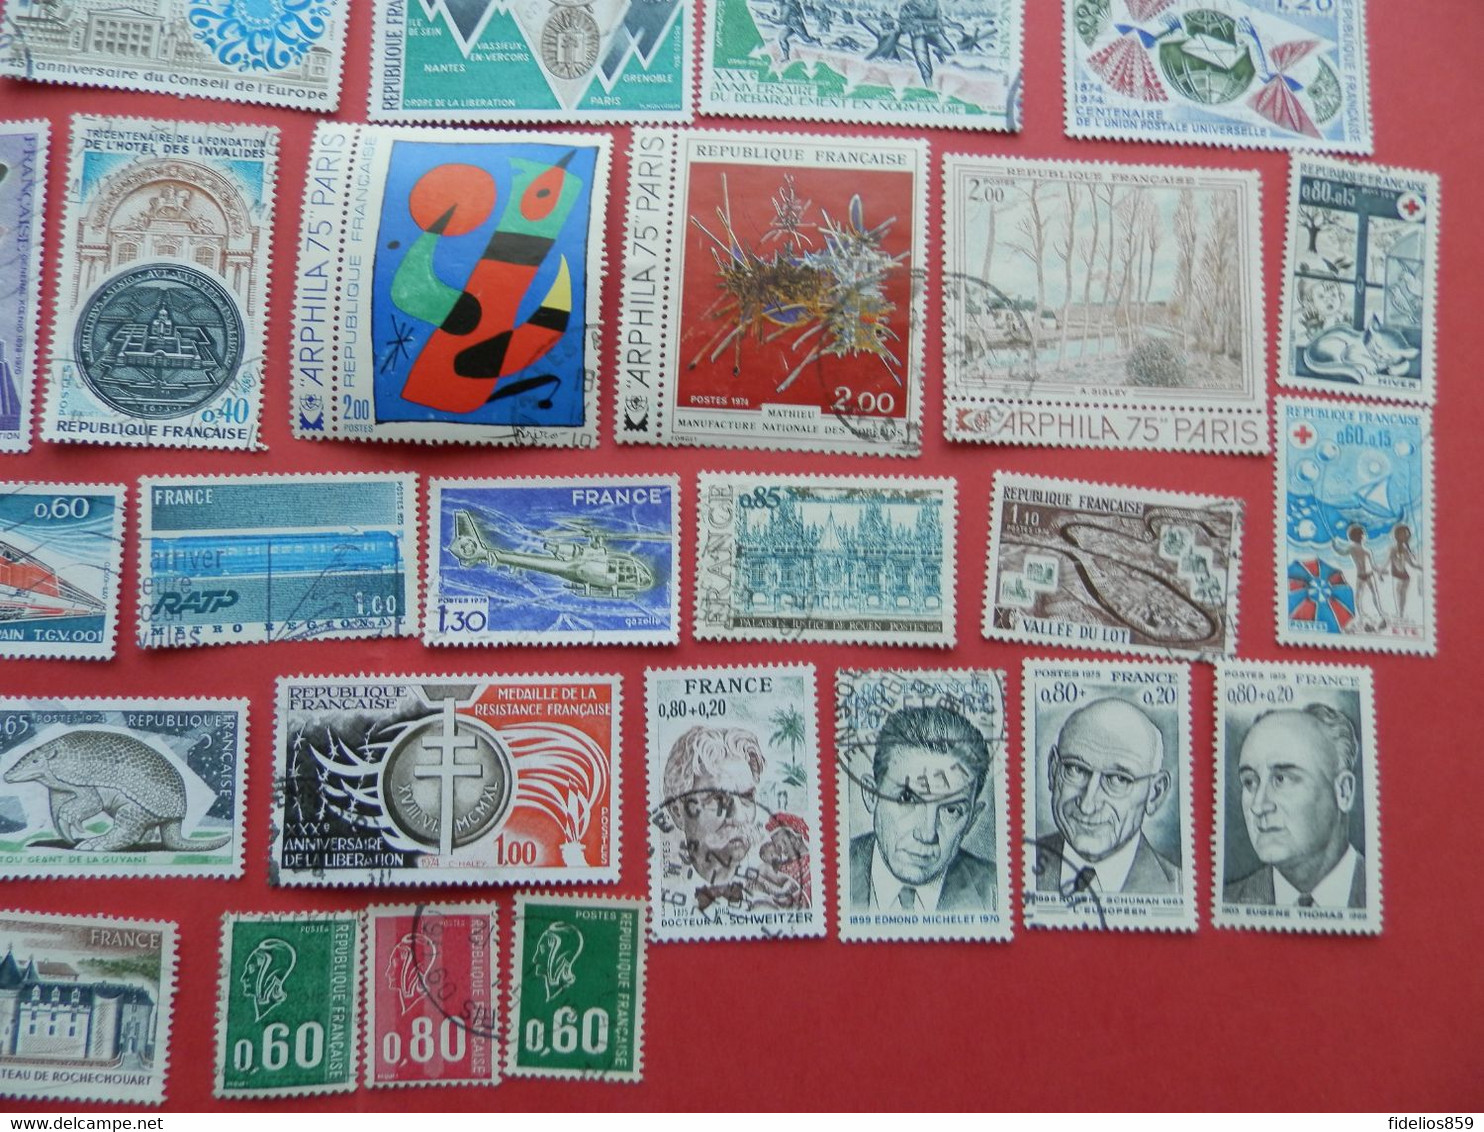 FRANCE OBLITERES : ANNEE COMPLETE 1974 SOIT 47 TIMBRES POSTE DIFFERENTS 1ER CHOIX - 1970-1979